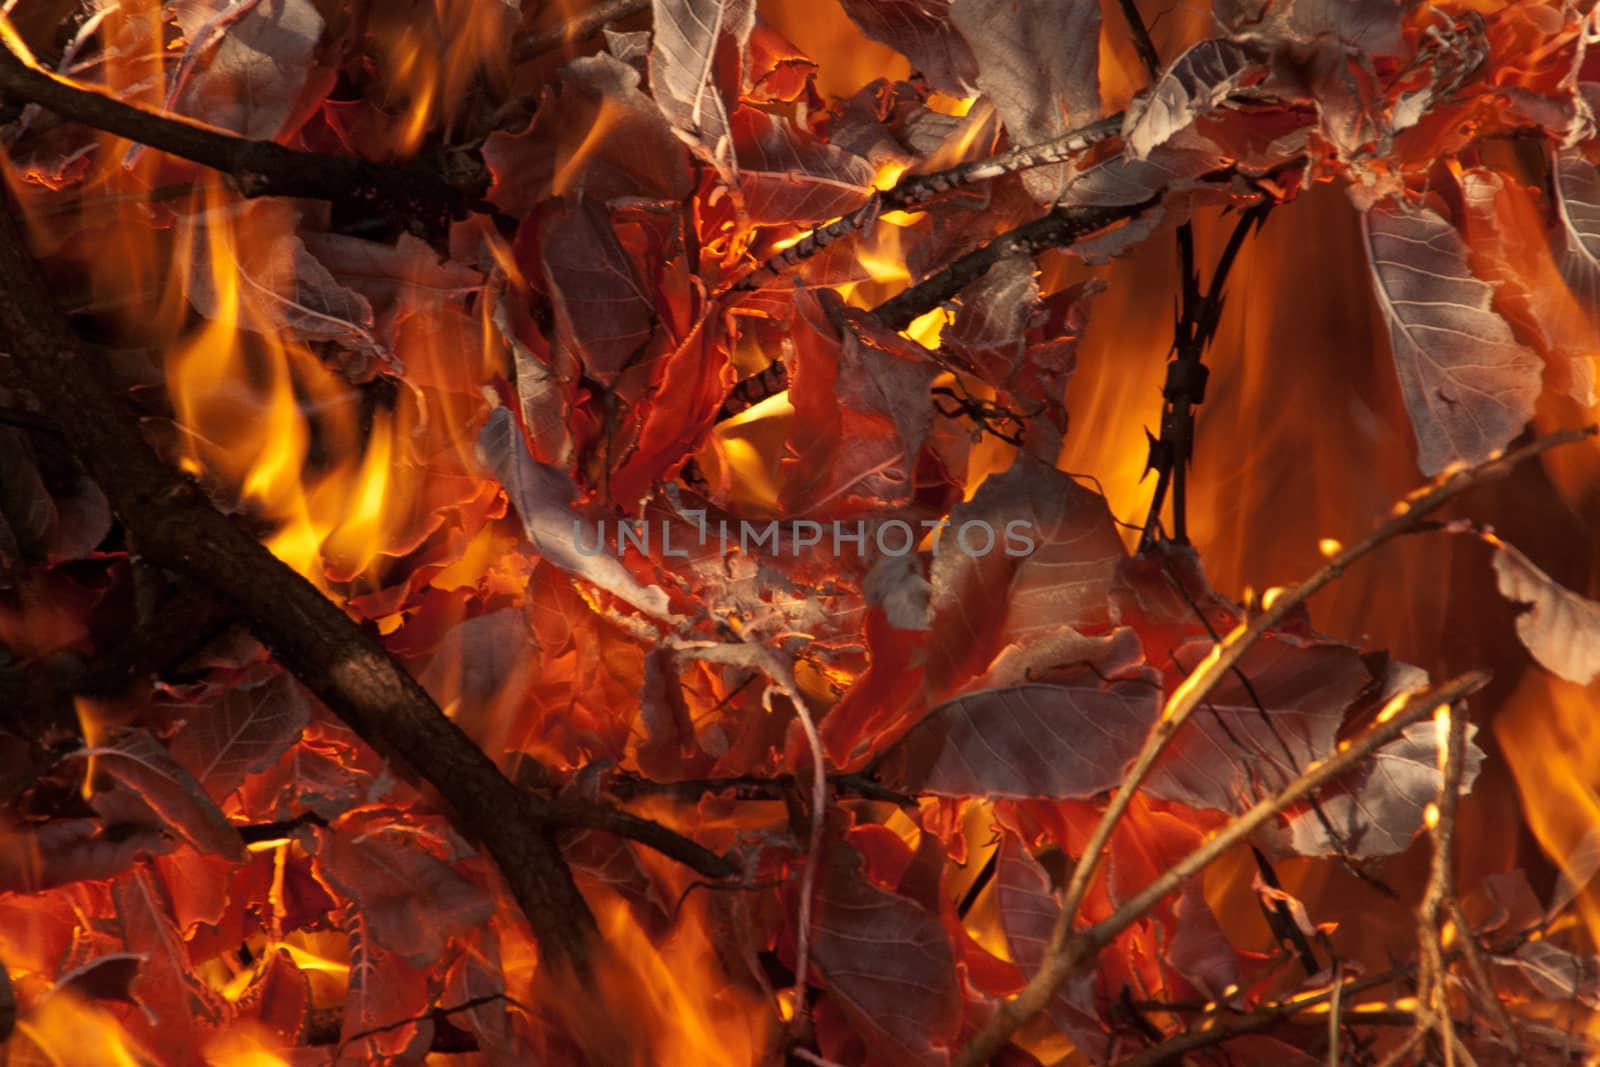 Wild fire burning leaves with branches in the foreground